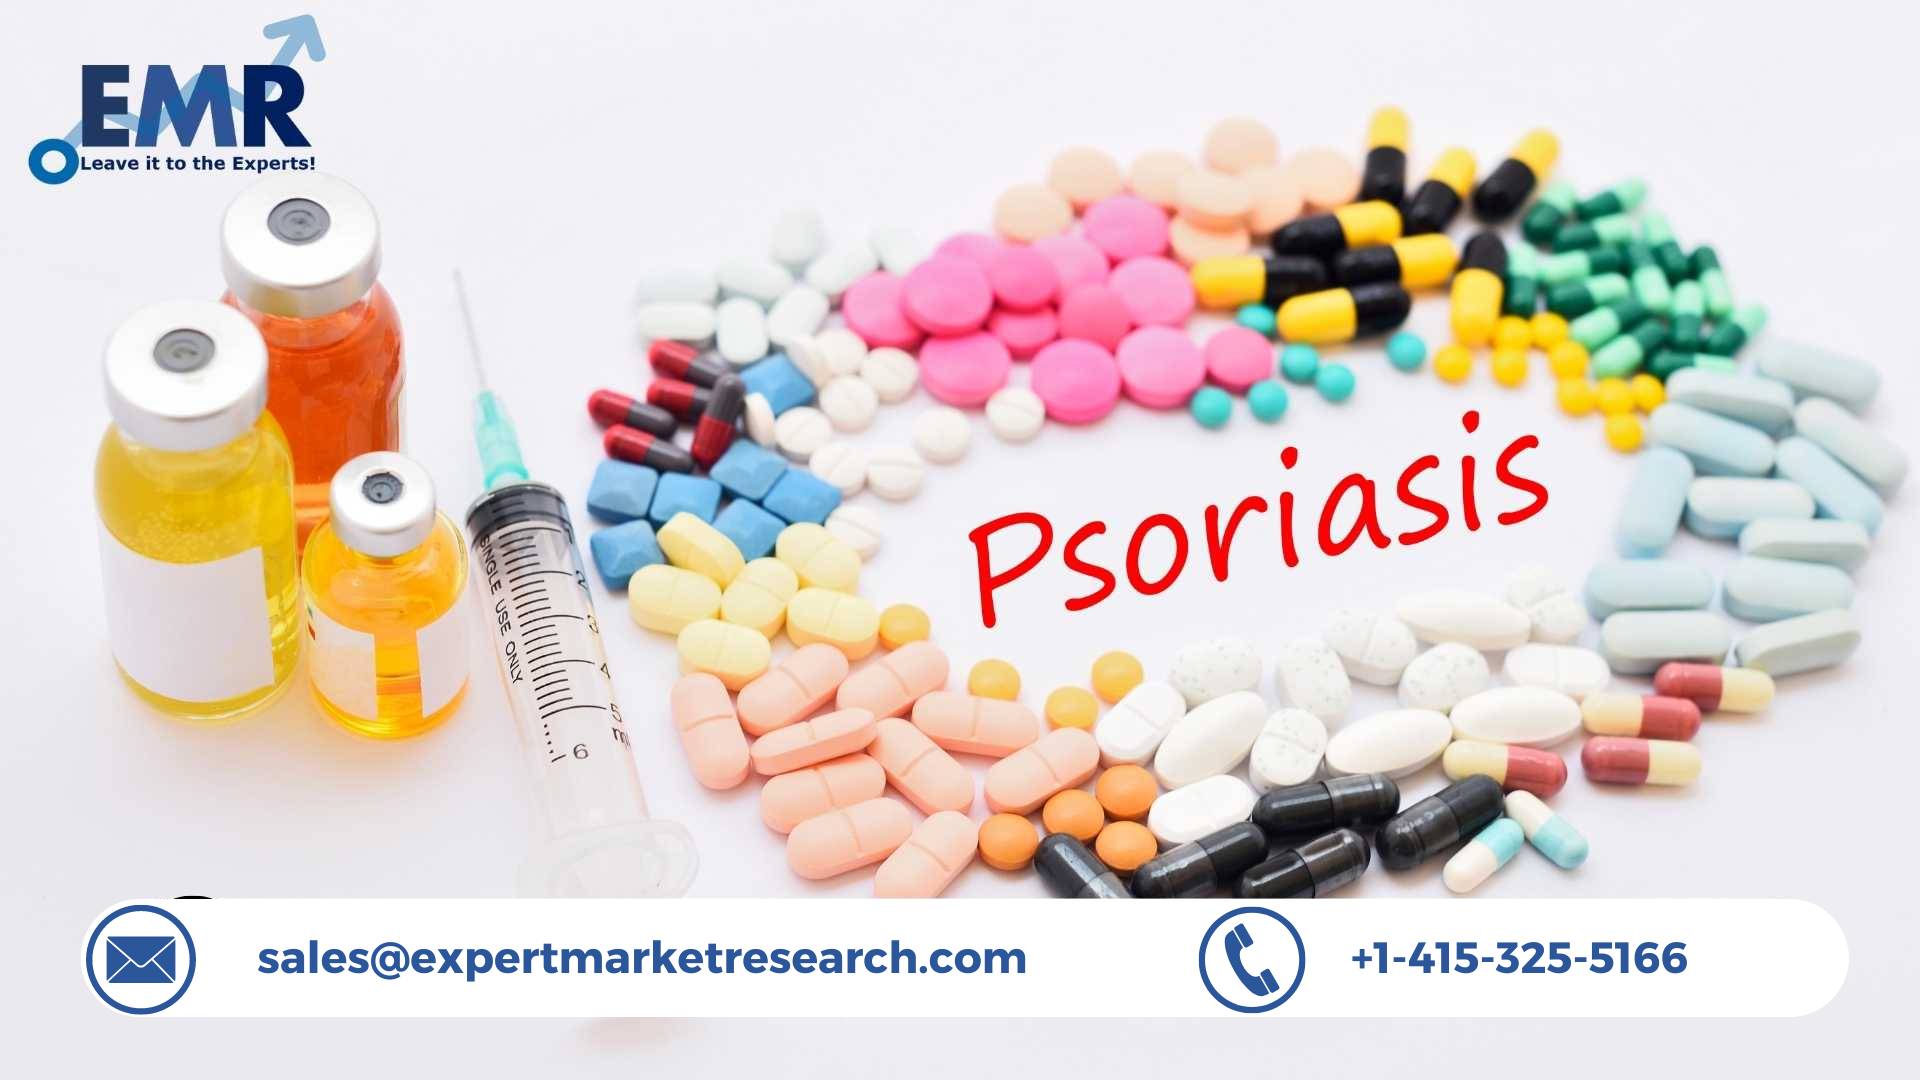 Global Psoriasis Treatment Market To Be Driven By Robust Research And Development (R&D) For The Development Of An Effective Treatment Method In The Forecast Period Of 2023-2028 | EMR Inc.